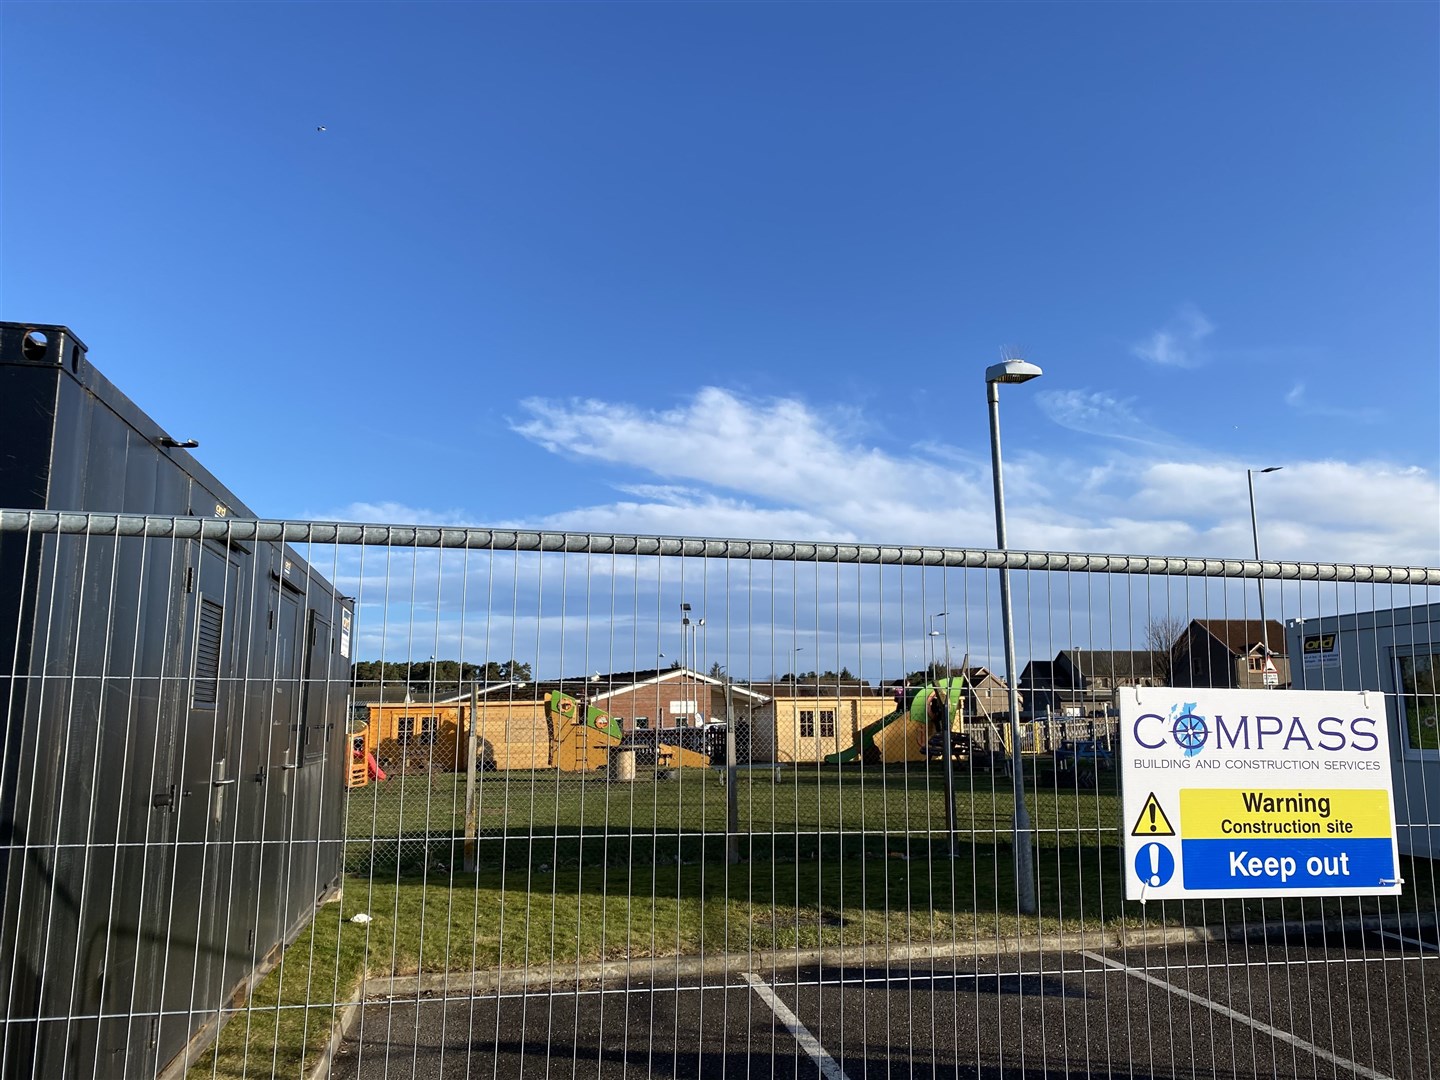 Work to expand the RAF Lossiemouth childcare centre is beginning.